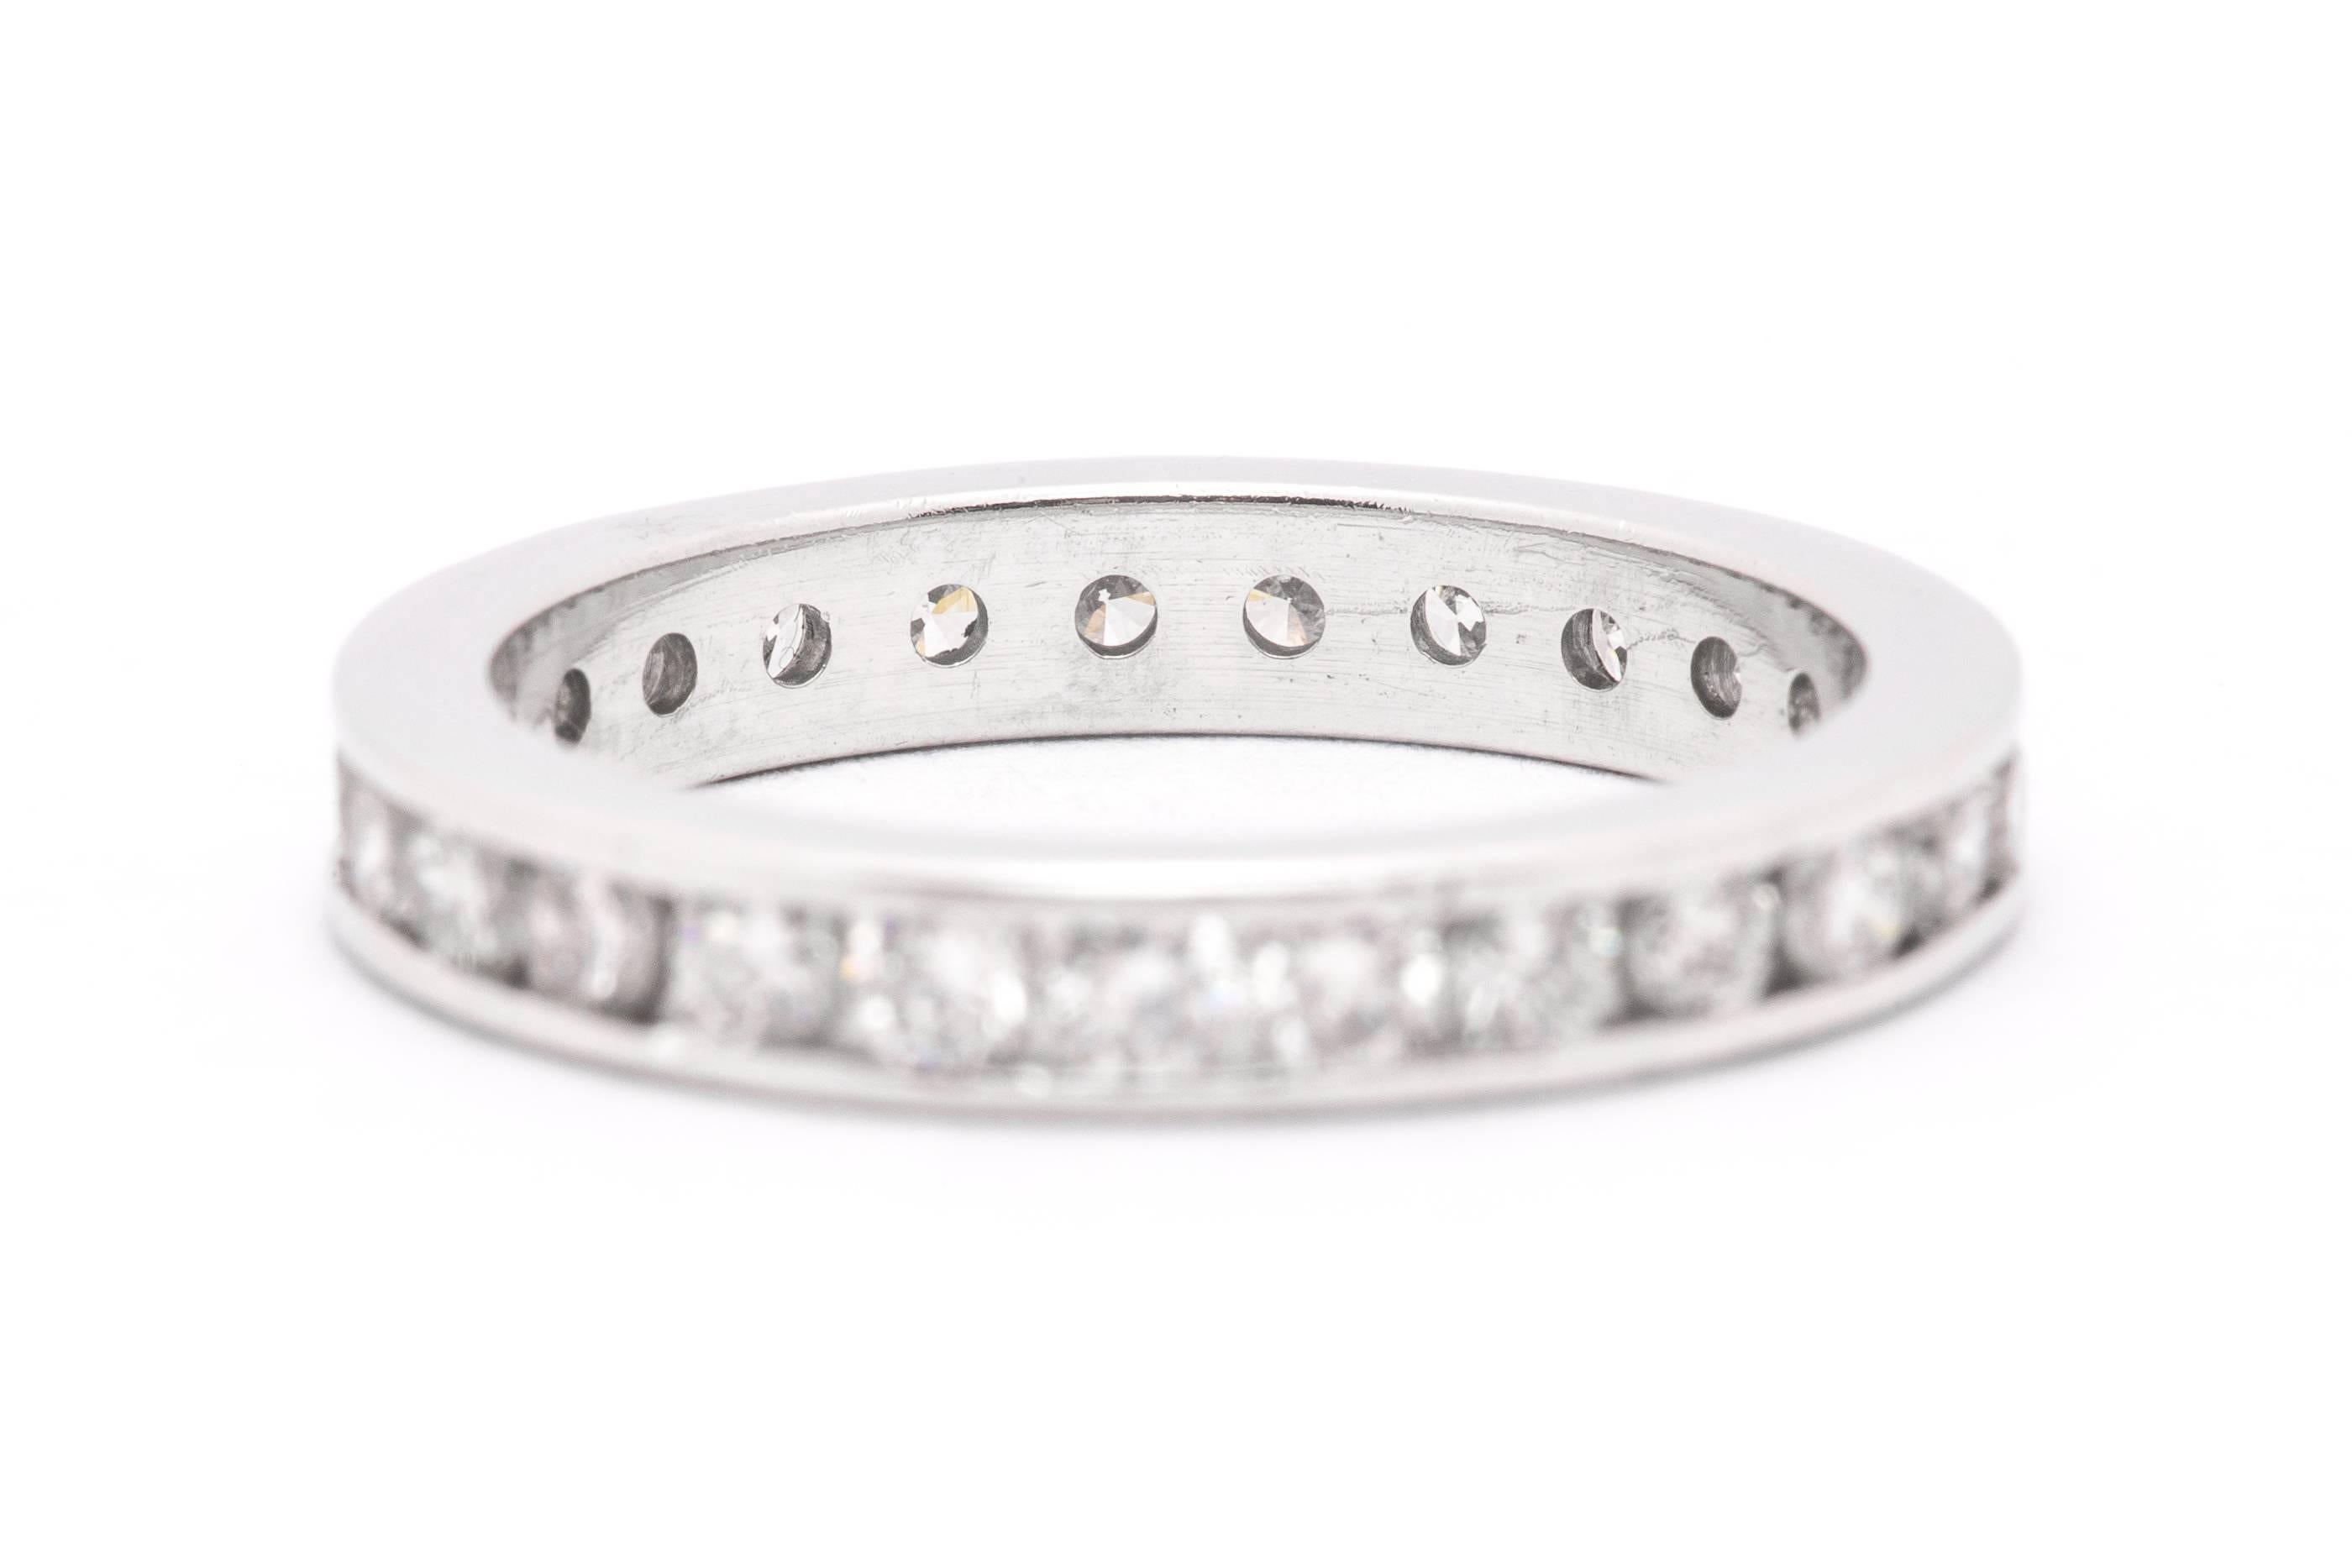 A one carat total weight diamond eternity band in luxurious platinum.  Set with a total of twenty five brilliant cut diamonds this band would complement any white gold, or platinum engagement ring perfectly.

Grading as VS clarity and G color, the